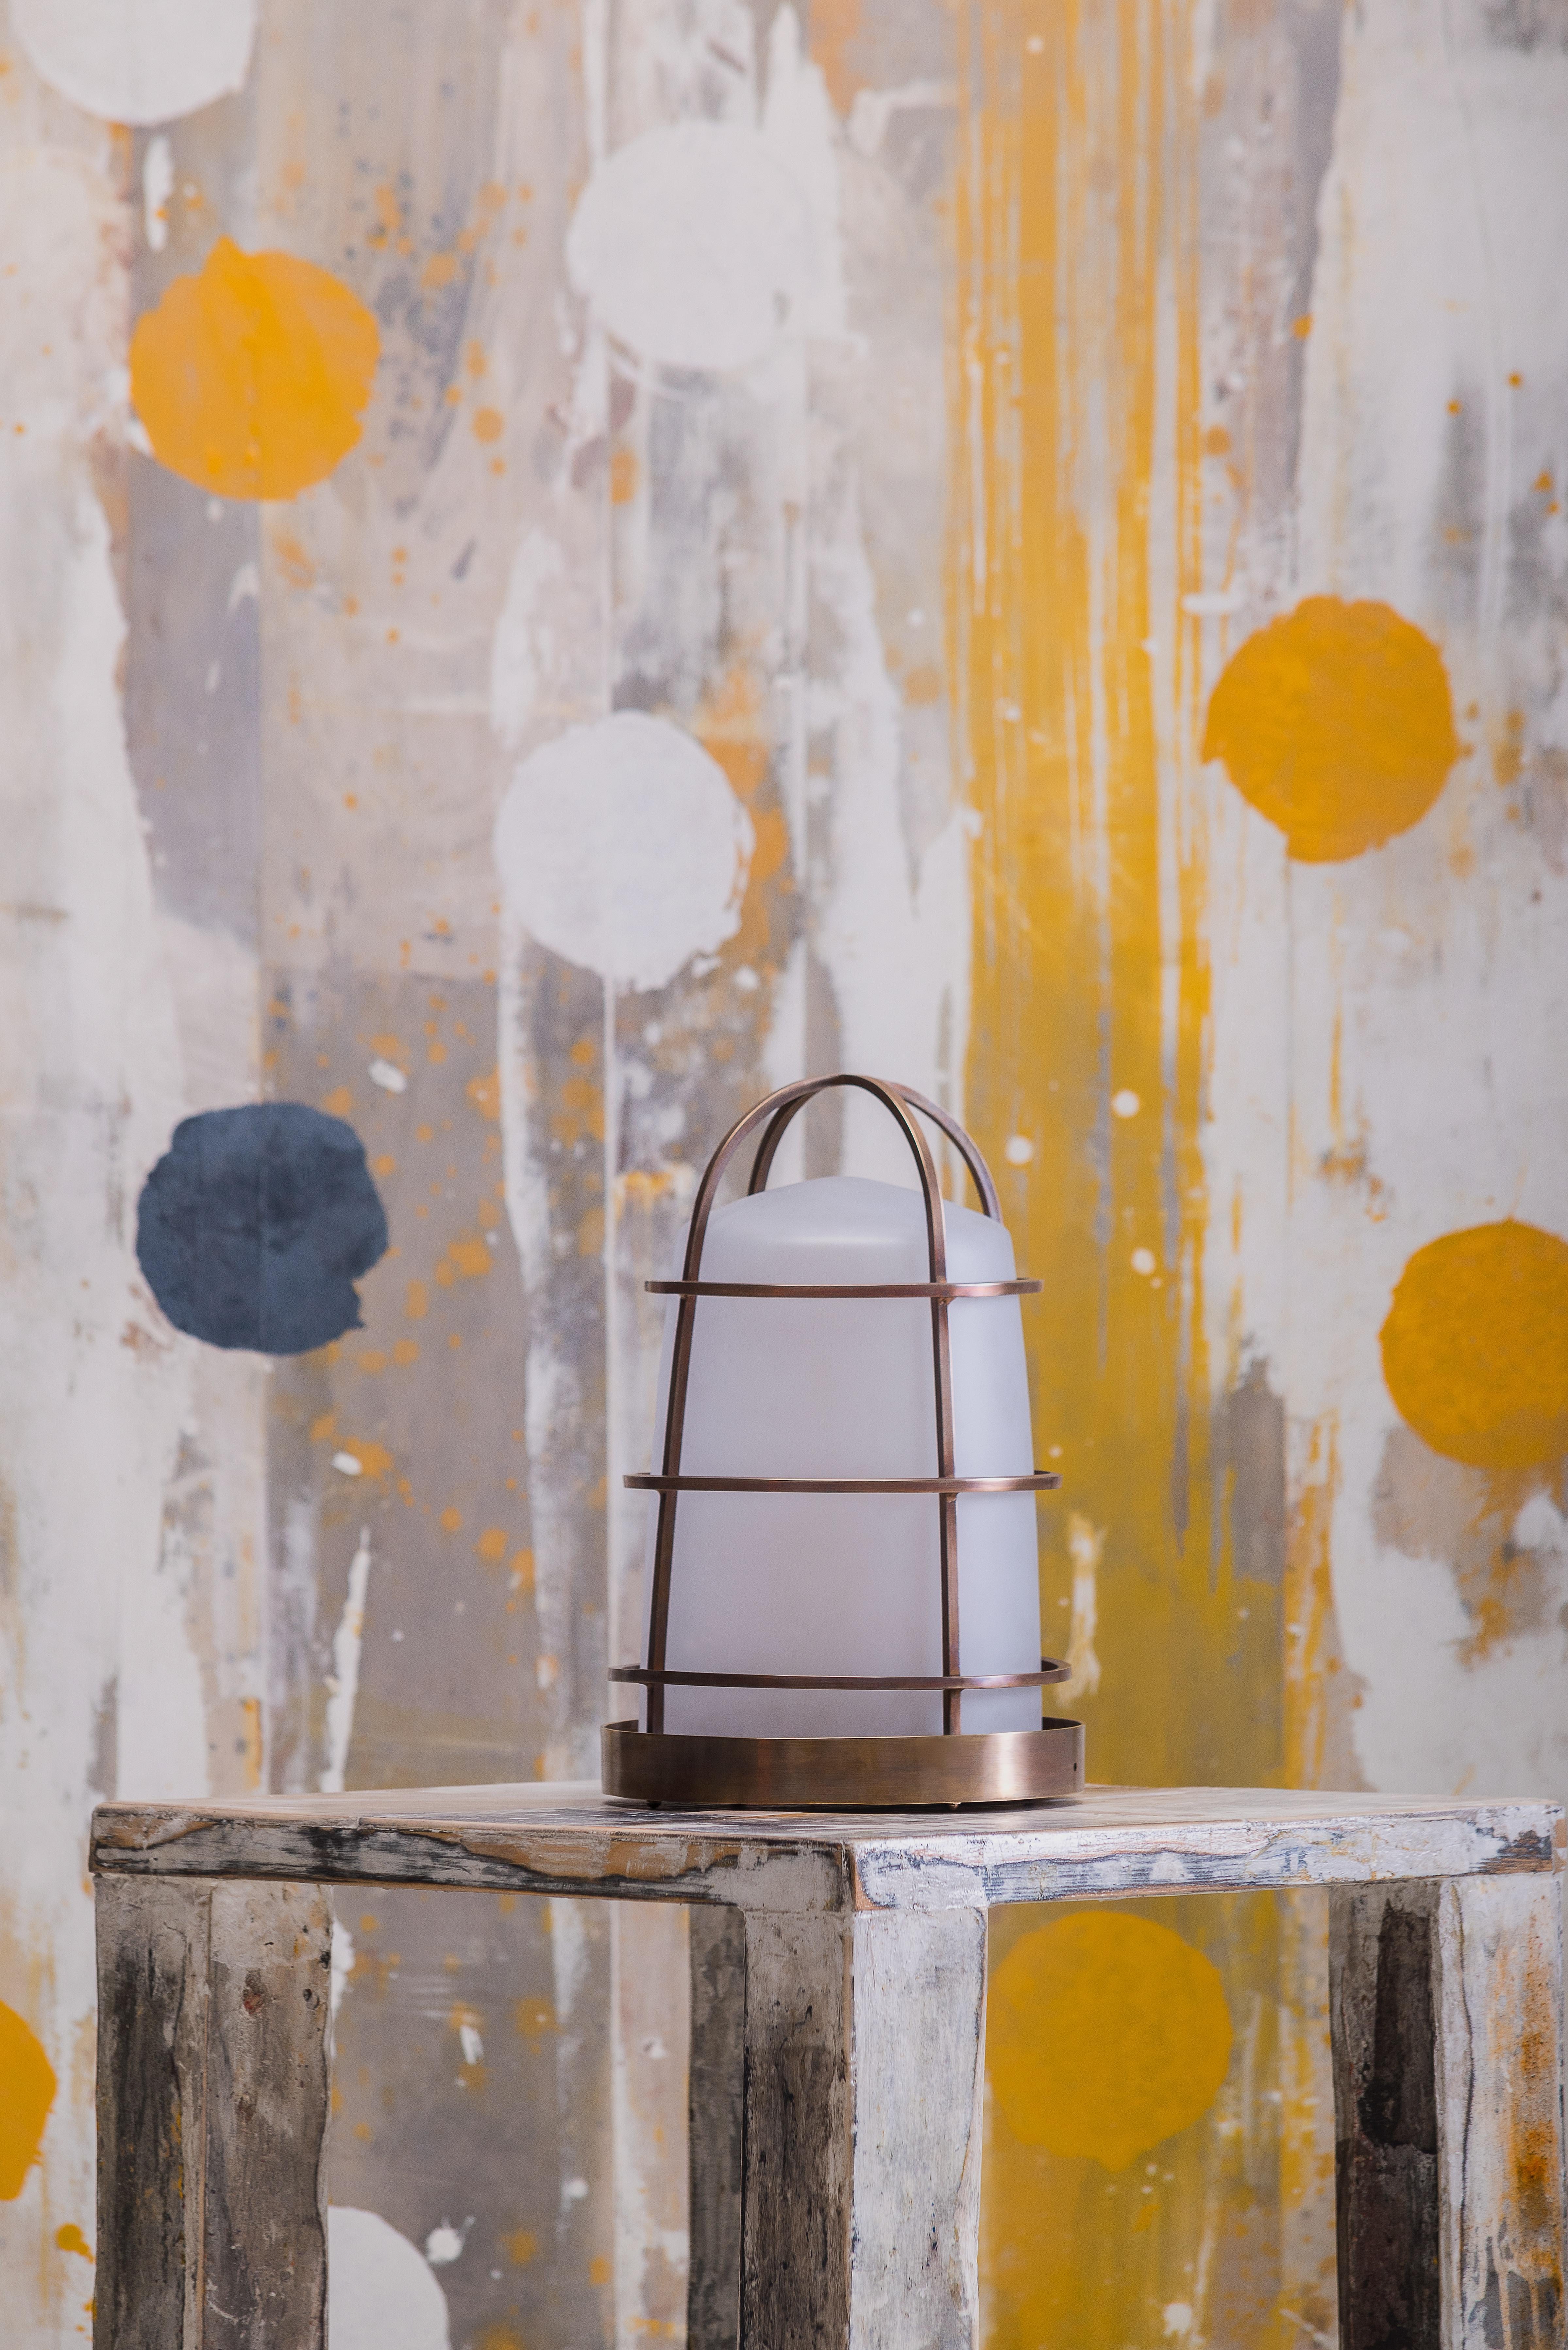 21st century Purho design Chiara lantern Murano glass and brass various colors
A heart of frosted Murano glass mounted into a brass cage. This is Chiara, a rechargeable lantern designed by Purho’s creative department, in which the seafaring